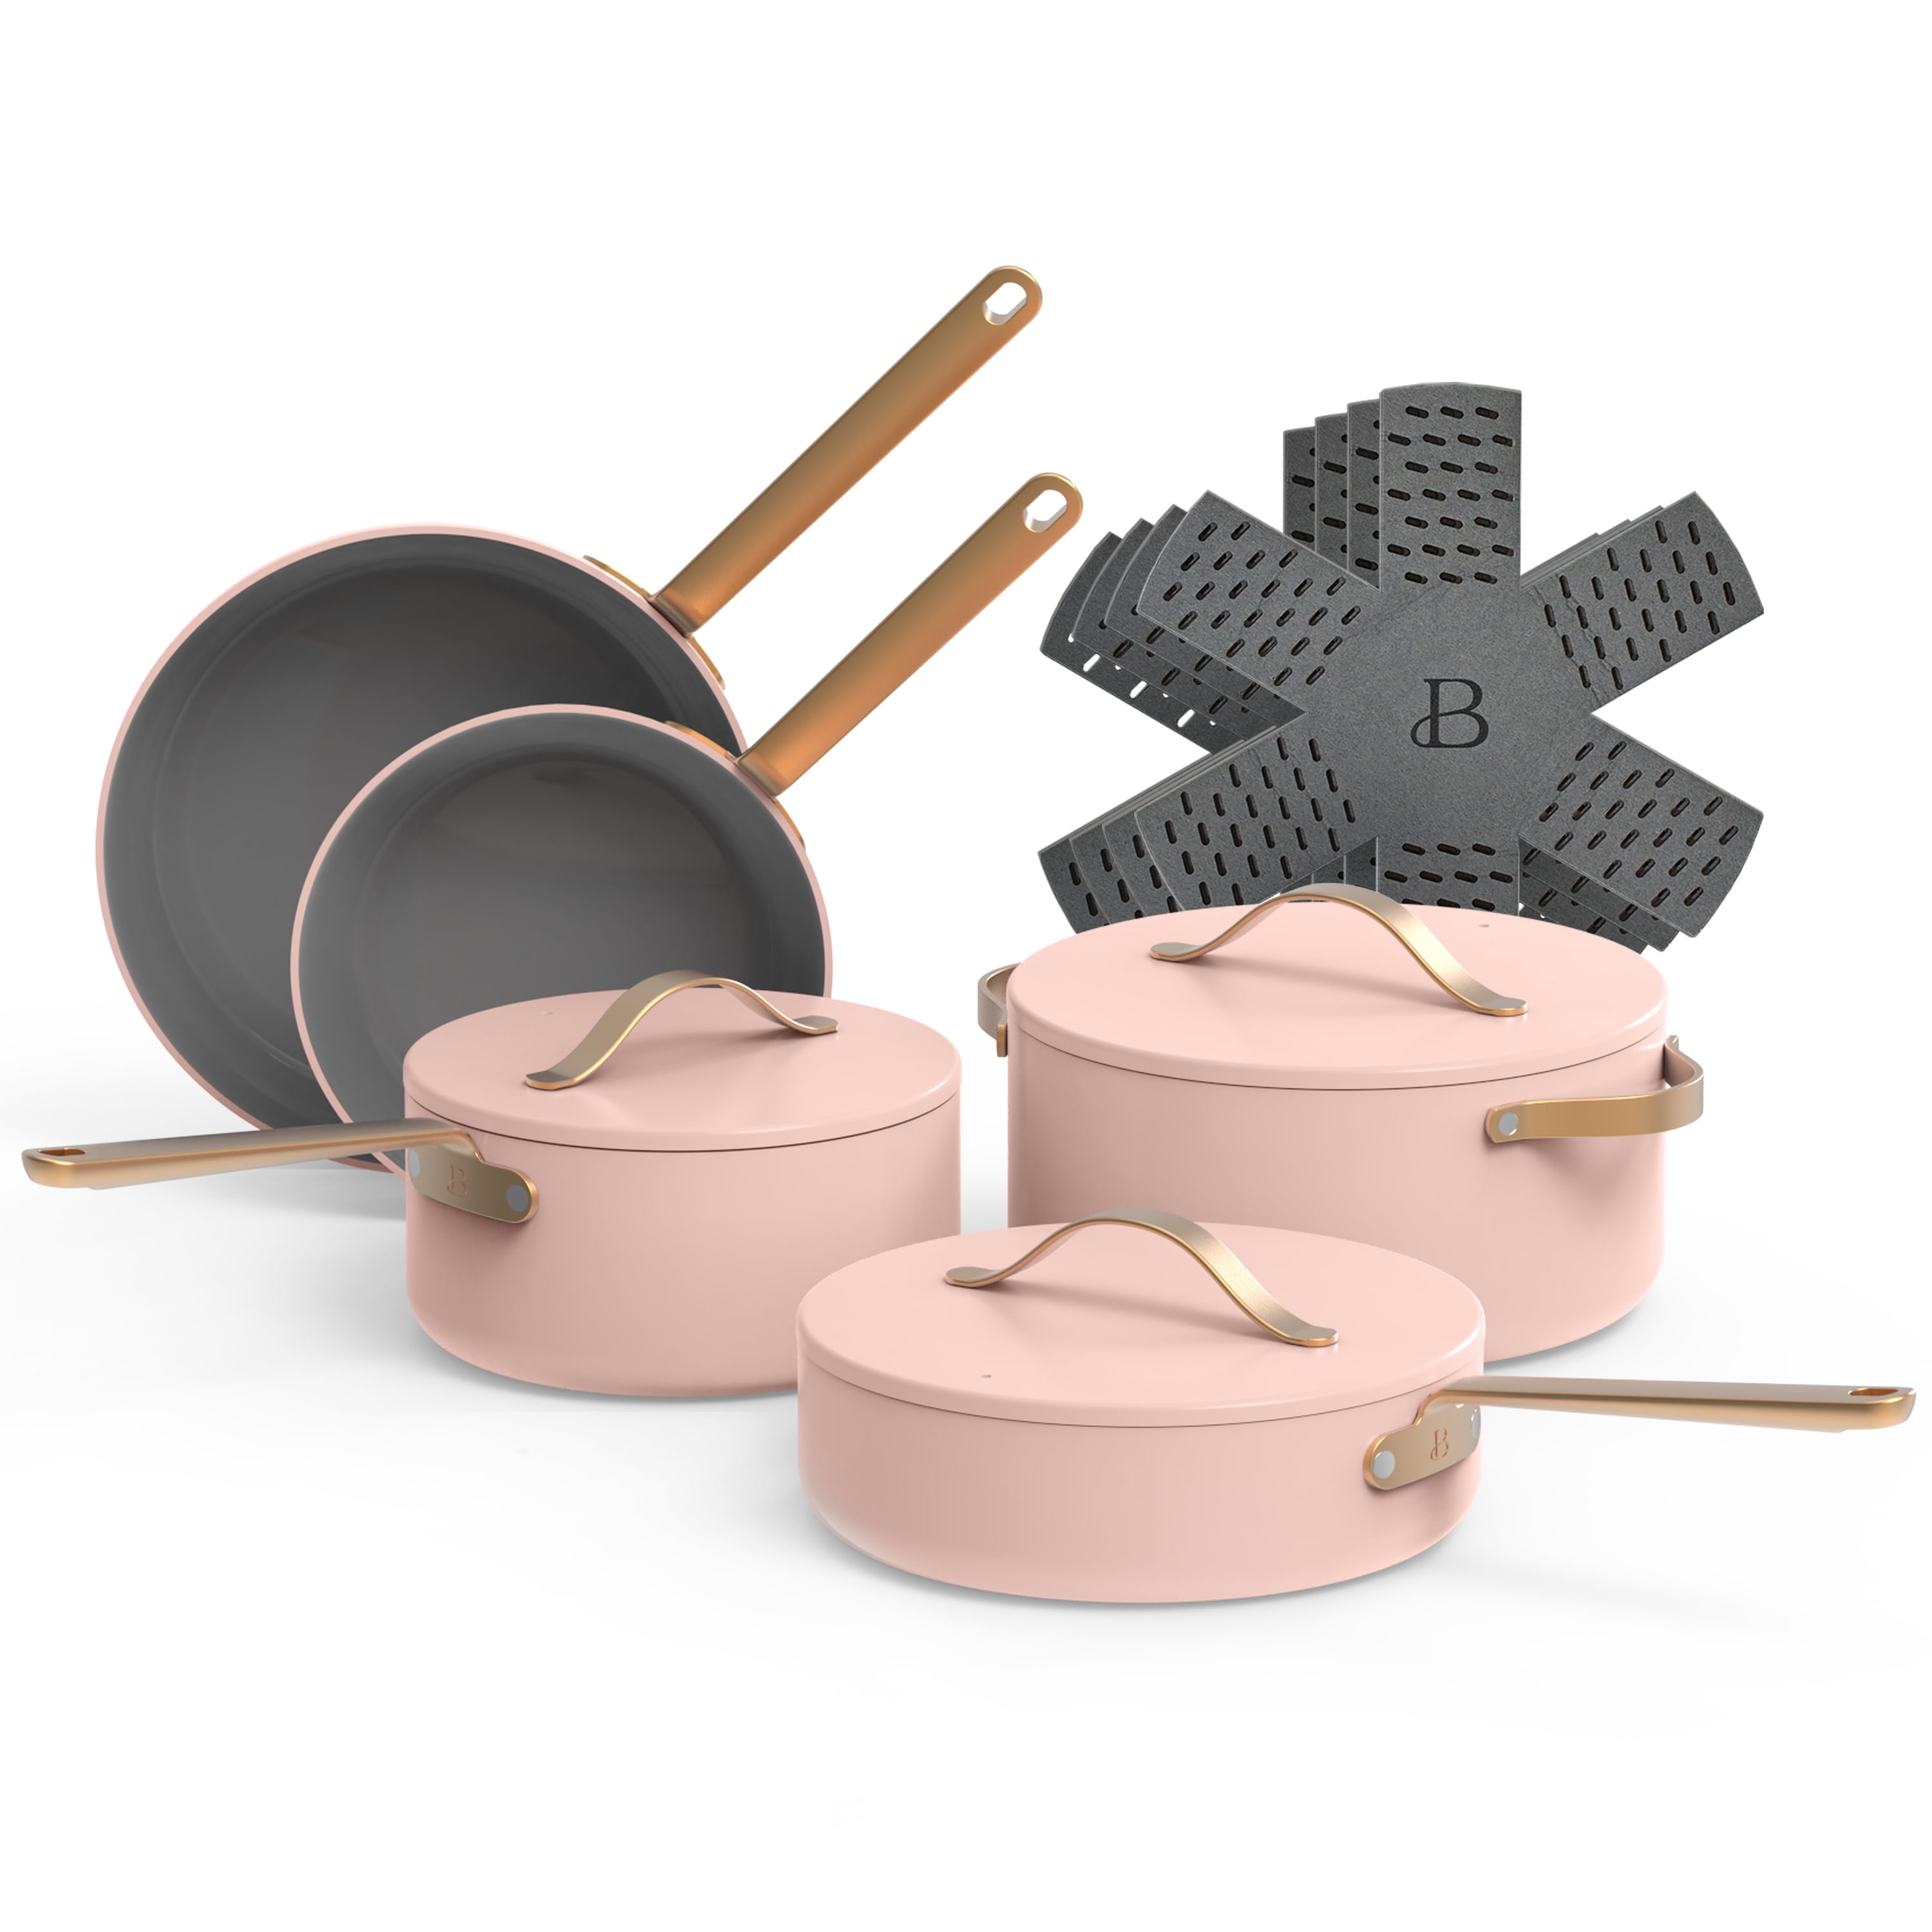 Beautiful by Drew Barrymore Cookware Review, Caraway Dupe